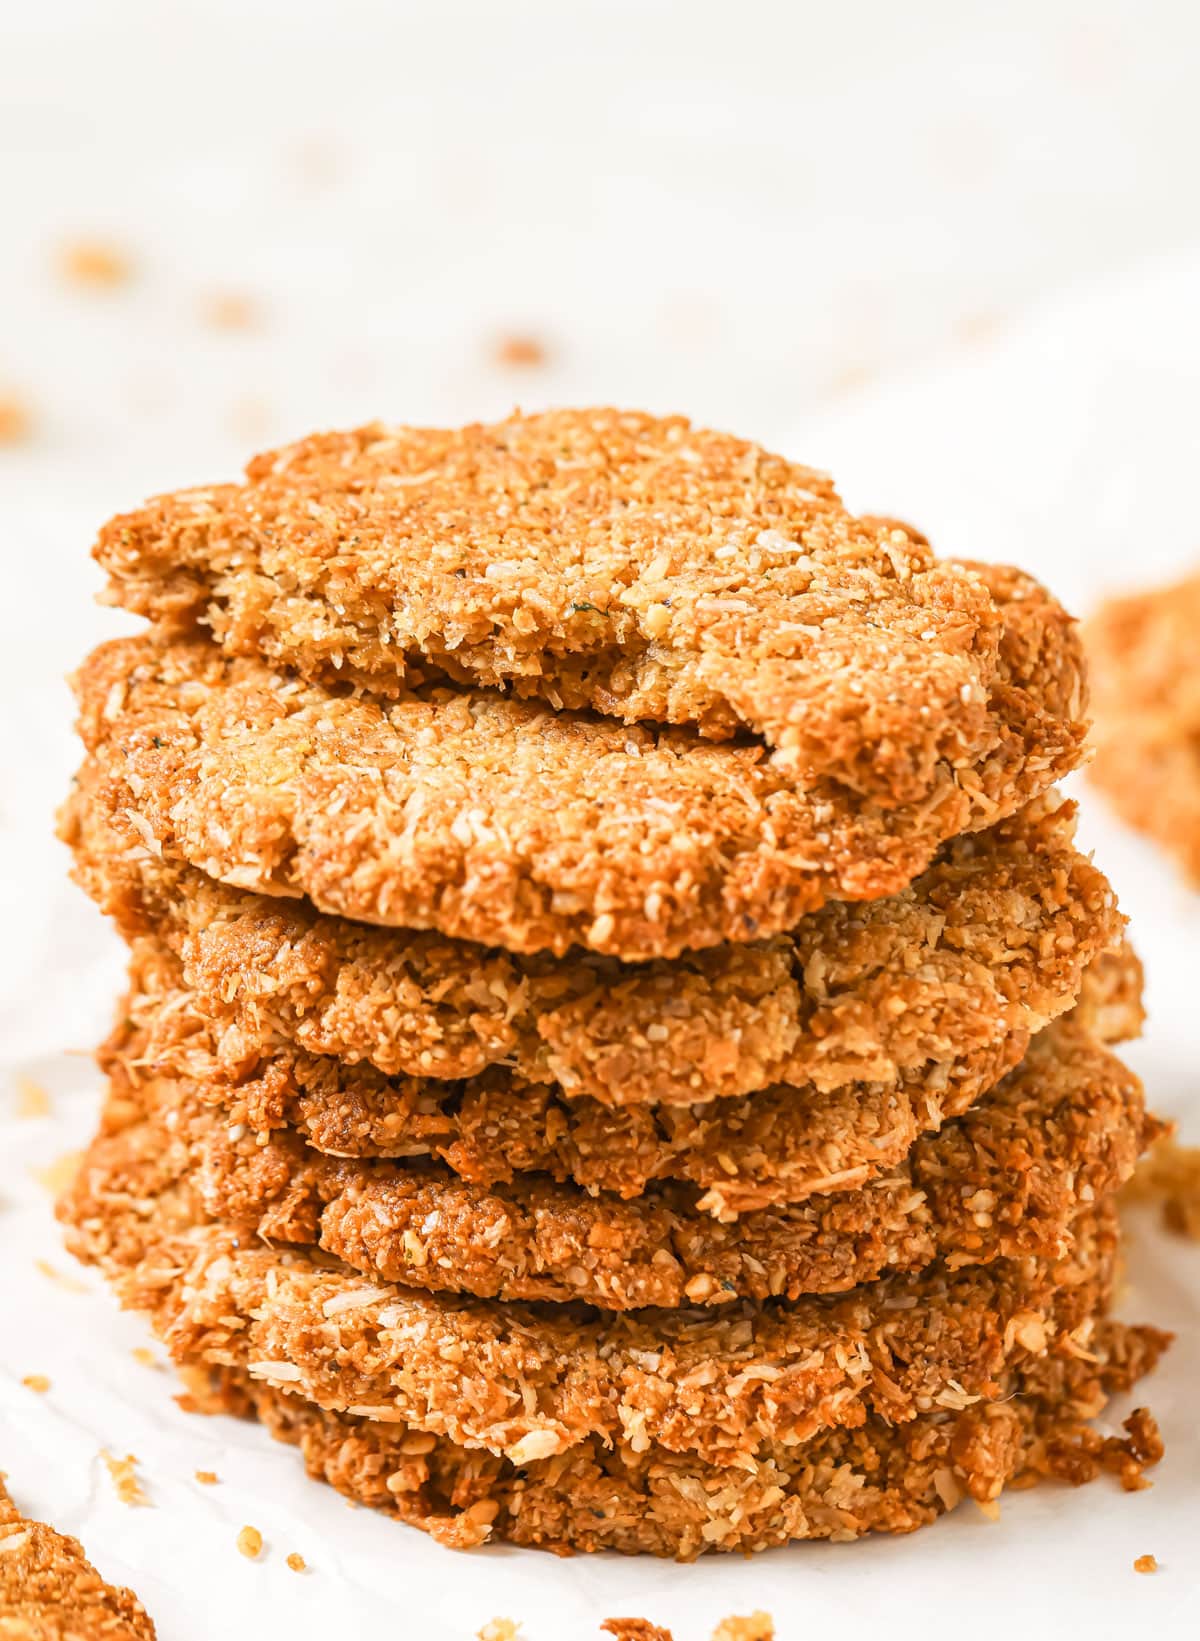 A stack of keto anzac biscuits, the top biscuit is broken in half.